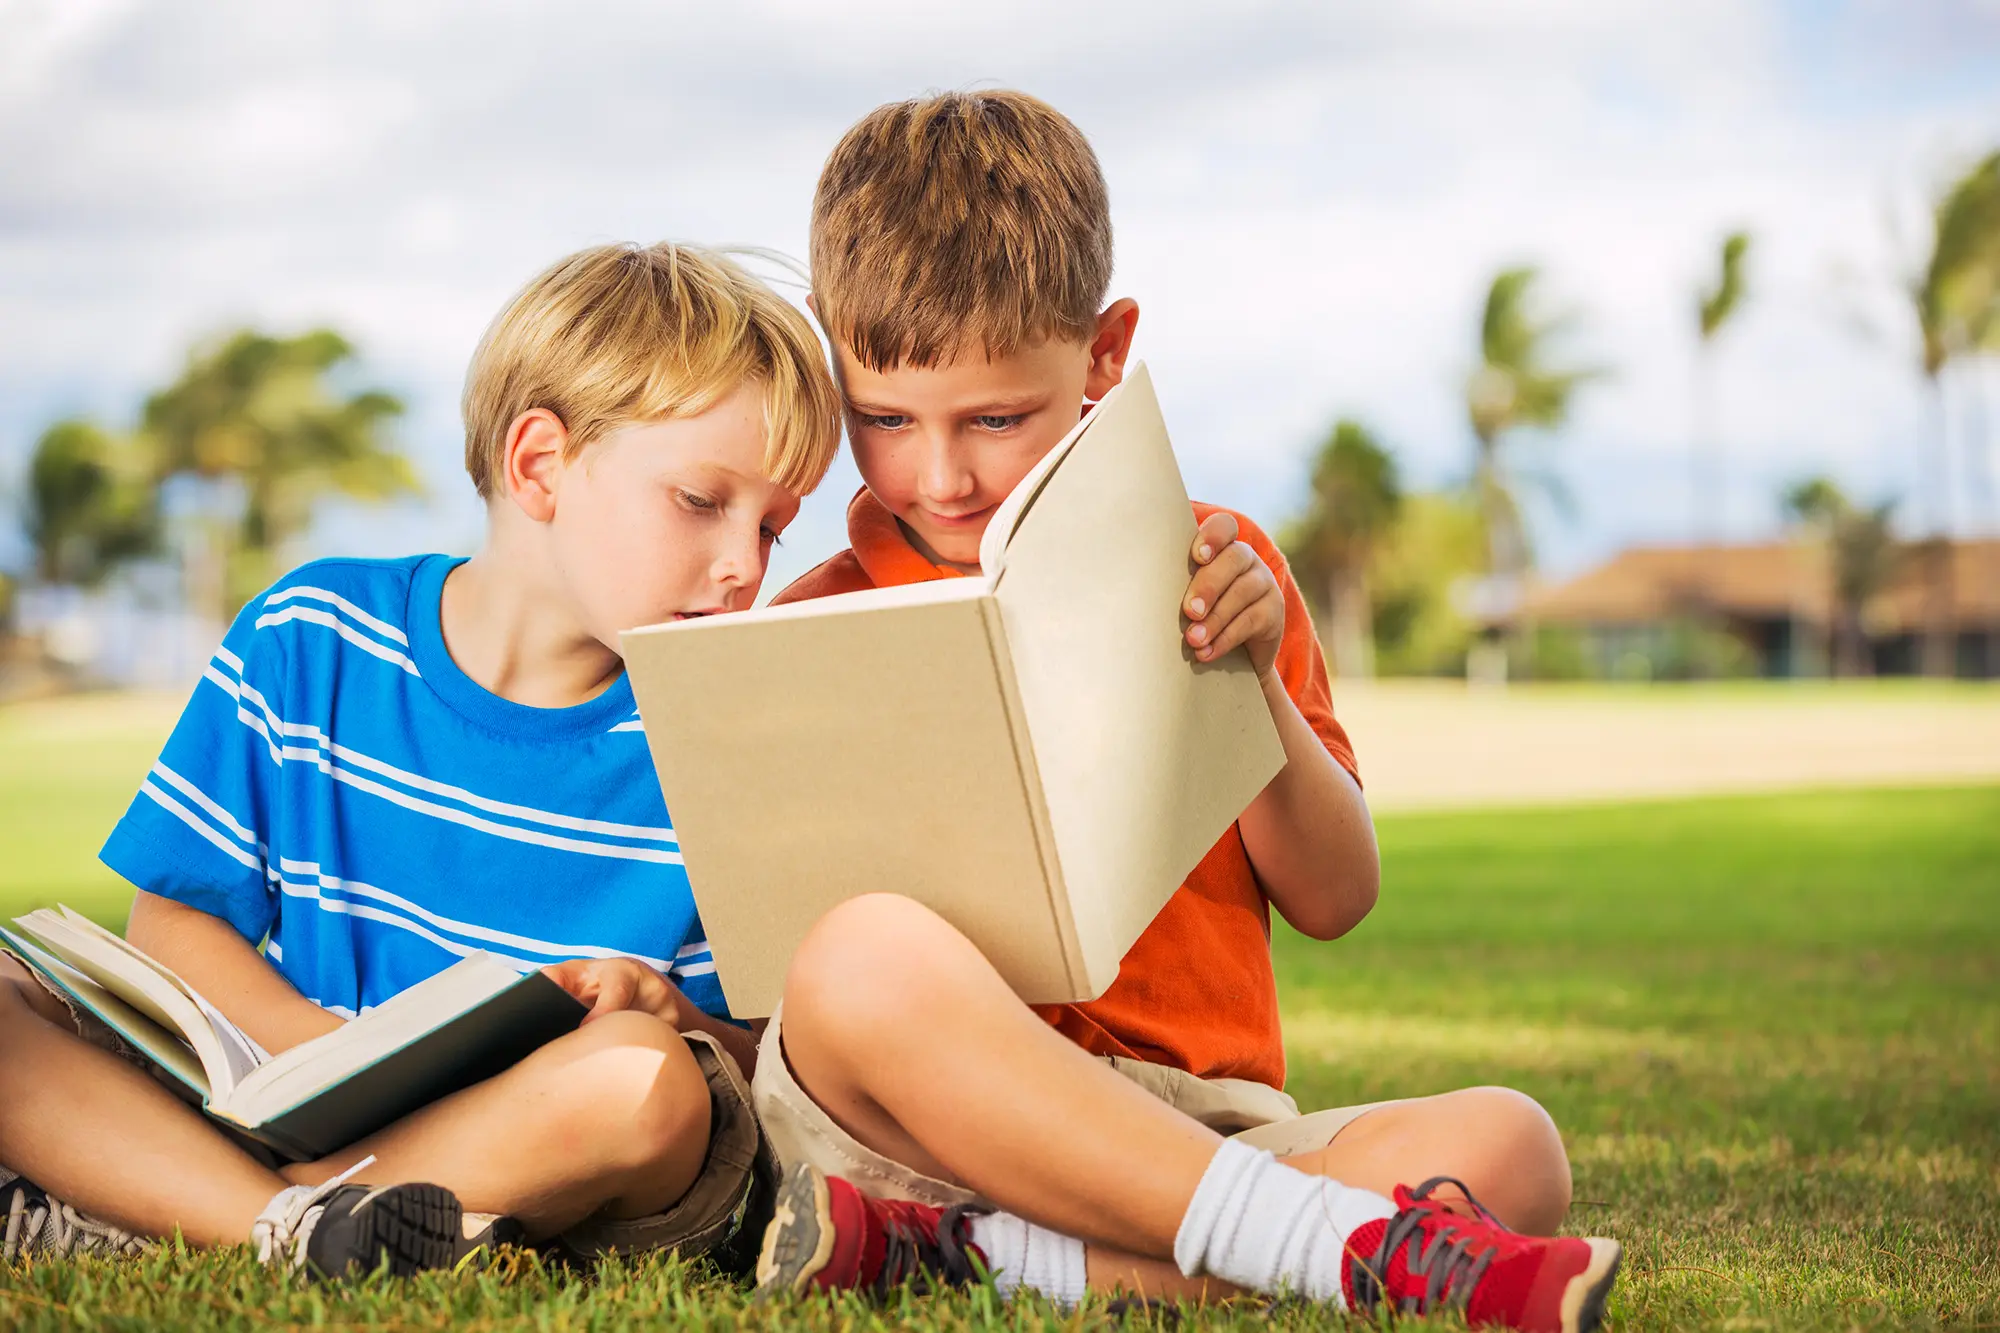 Two young boys sat on some grass reading from a book.